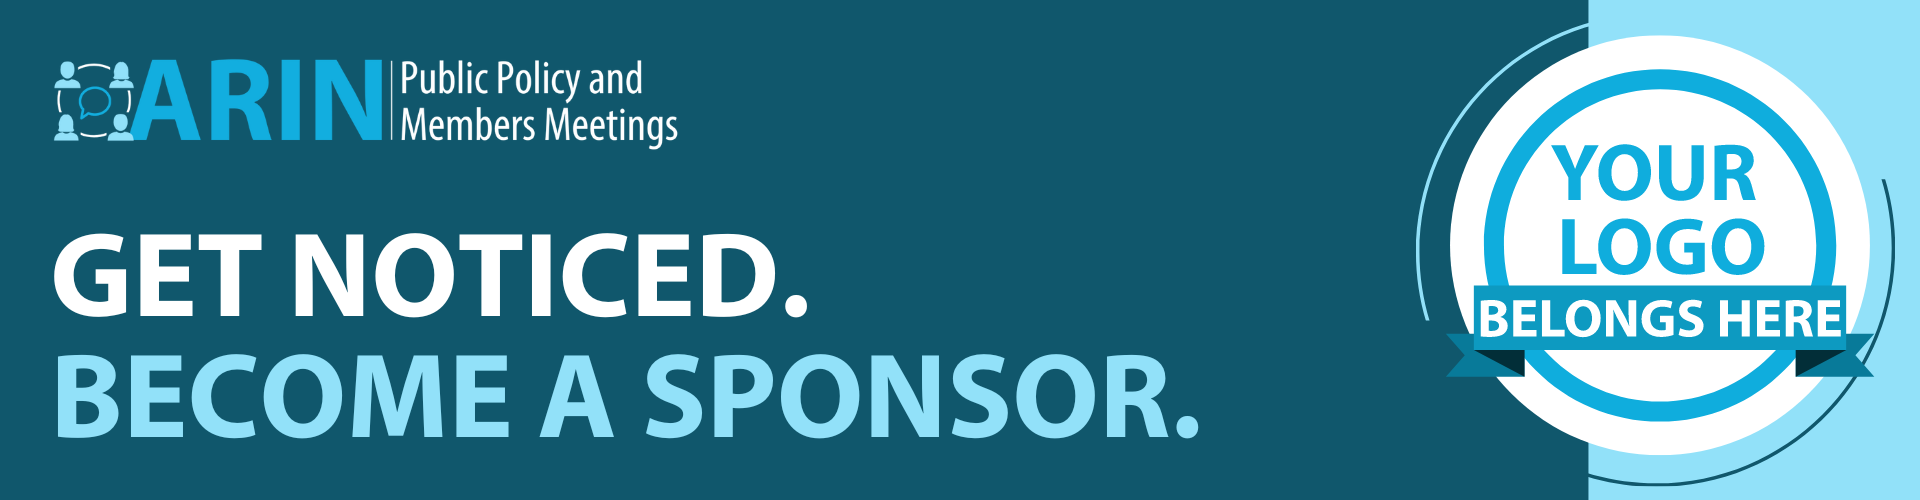 Become a Sponsor Supporting the Operating and Growth of the Internet: Your Logo Belongs Here